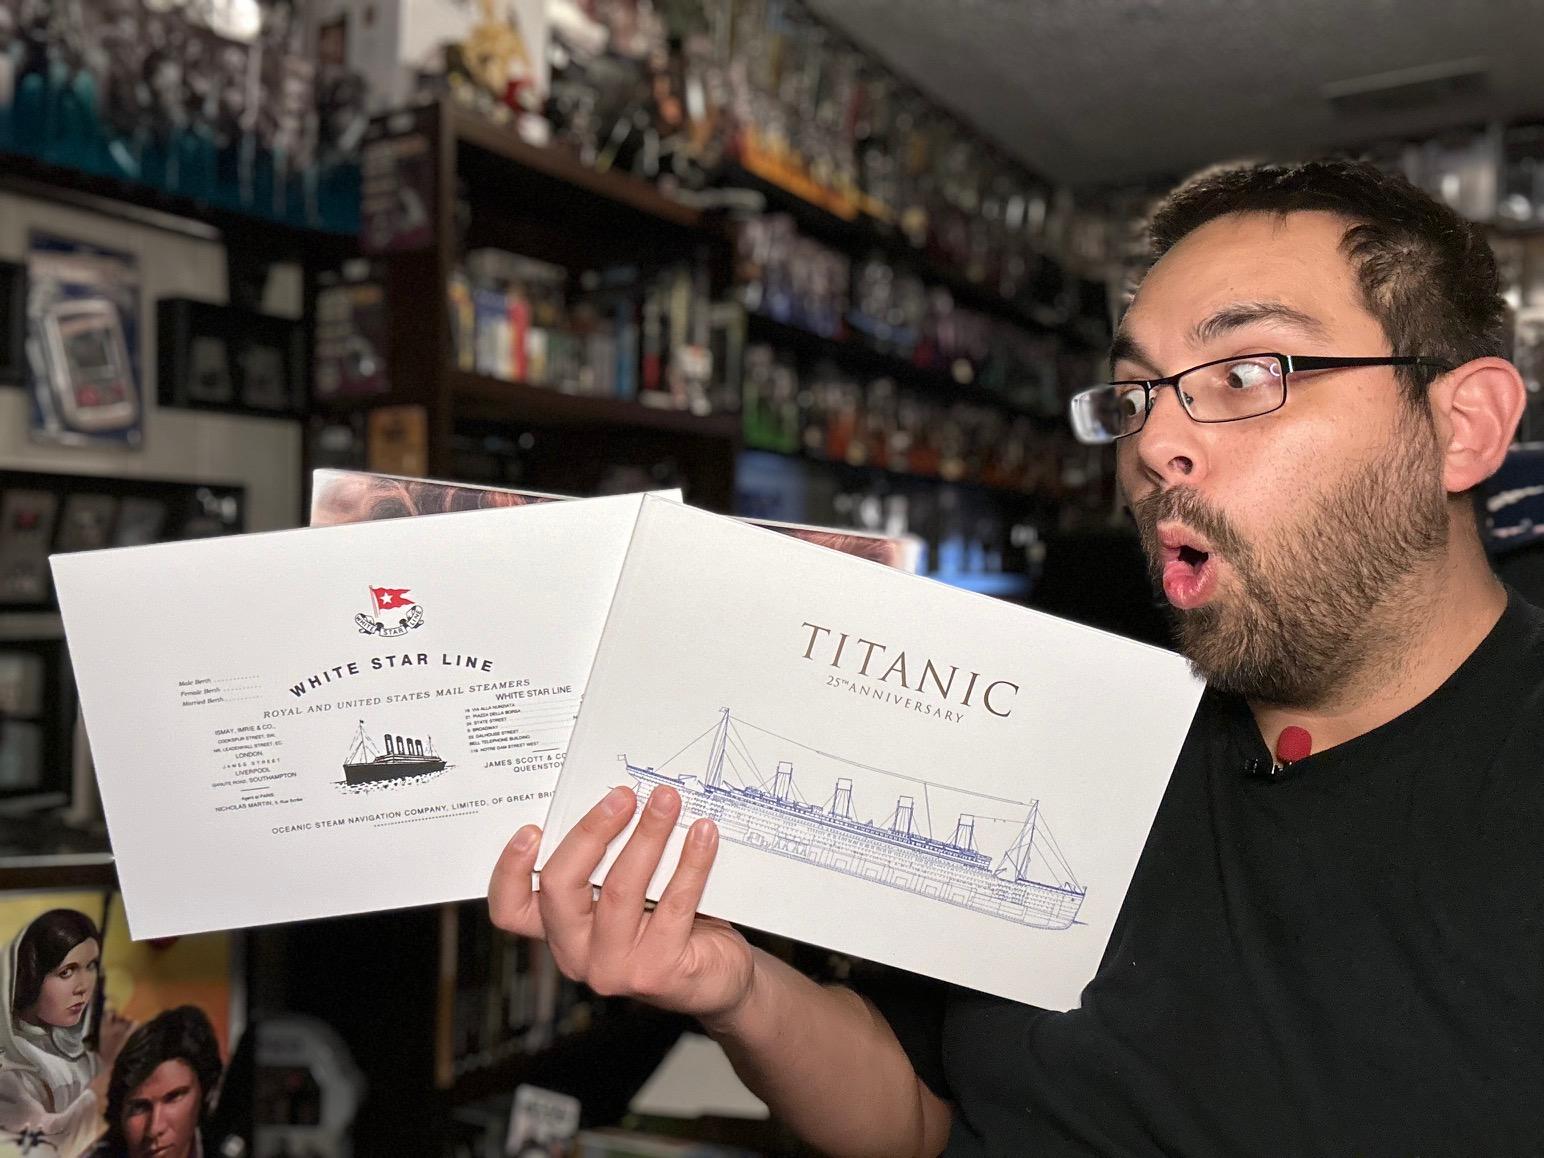 4K ᑕOᒪᒪEᑕTIᐯE on X: @JimCameron's Titanic celebrates its 25th Anniversary  arriving on 4K @UltraHDBluray in this limited collector's edition set in  the USA from @ParamountPics Titanic 4K UltraHD Blu-ray 25th Anniversary  Limited